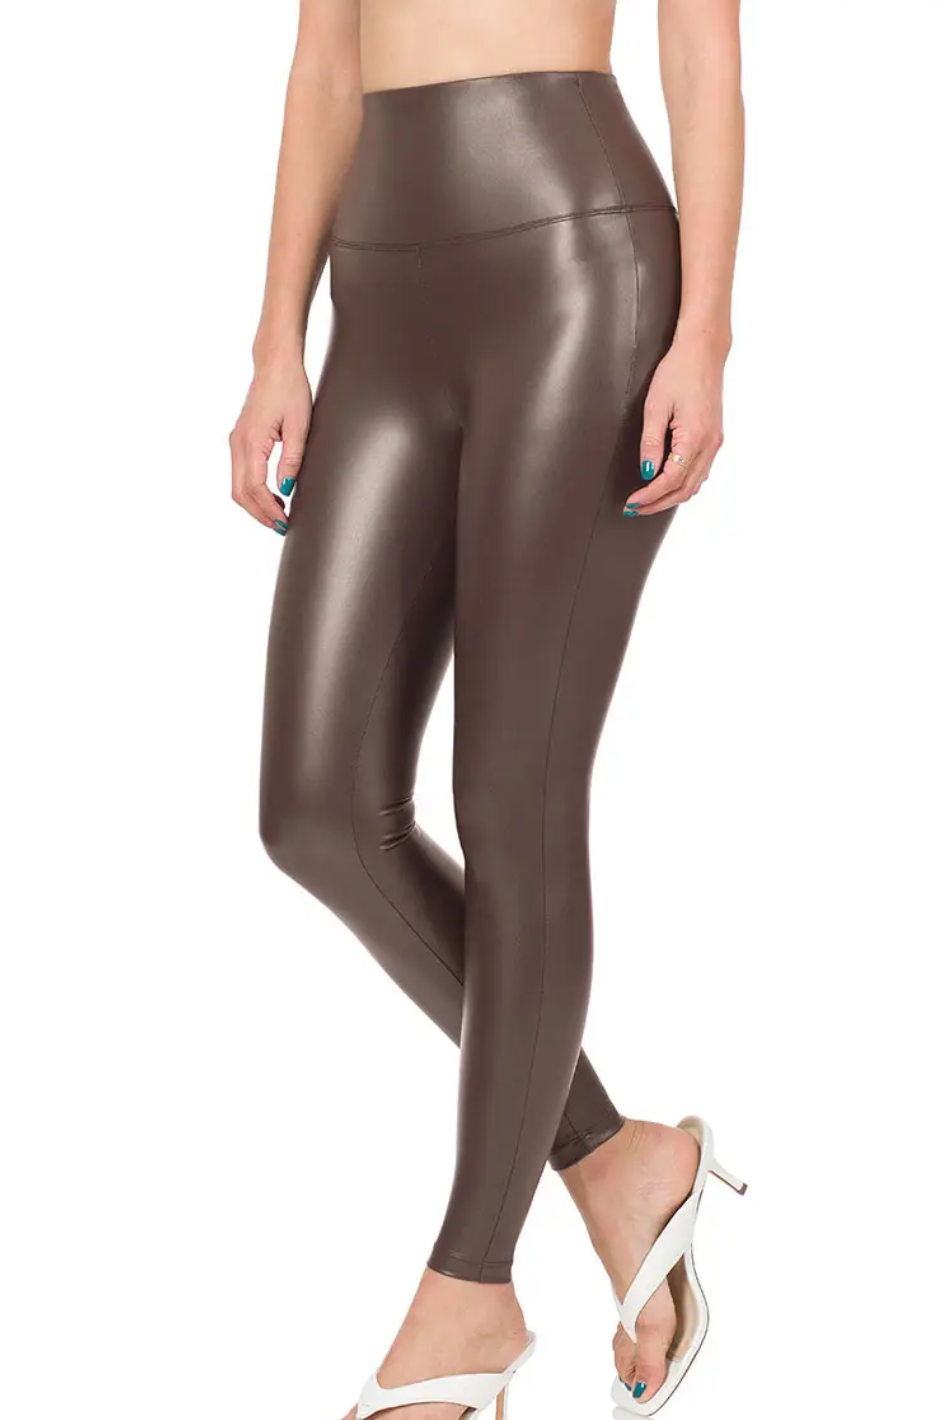 SPANX, Pants & Jumpsuits, Spanx Faux Leather Leggings In Color Wine